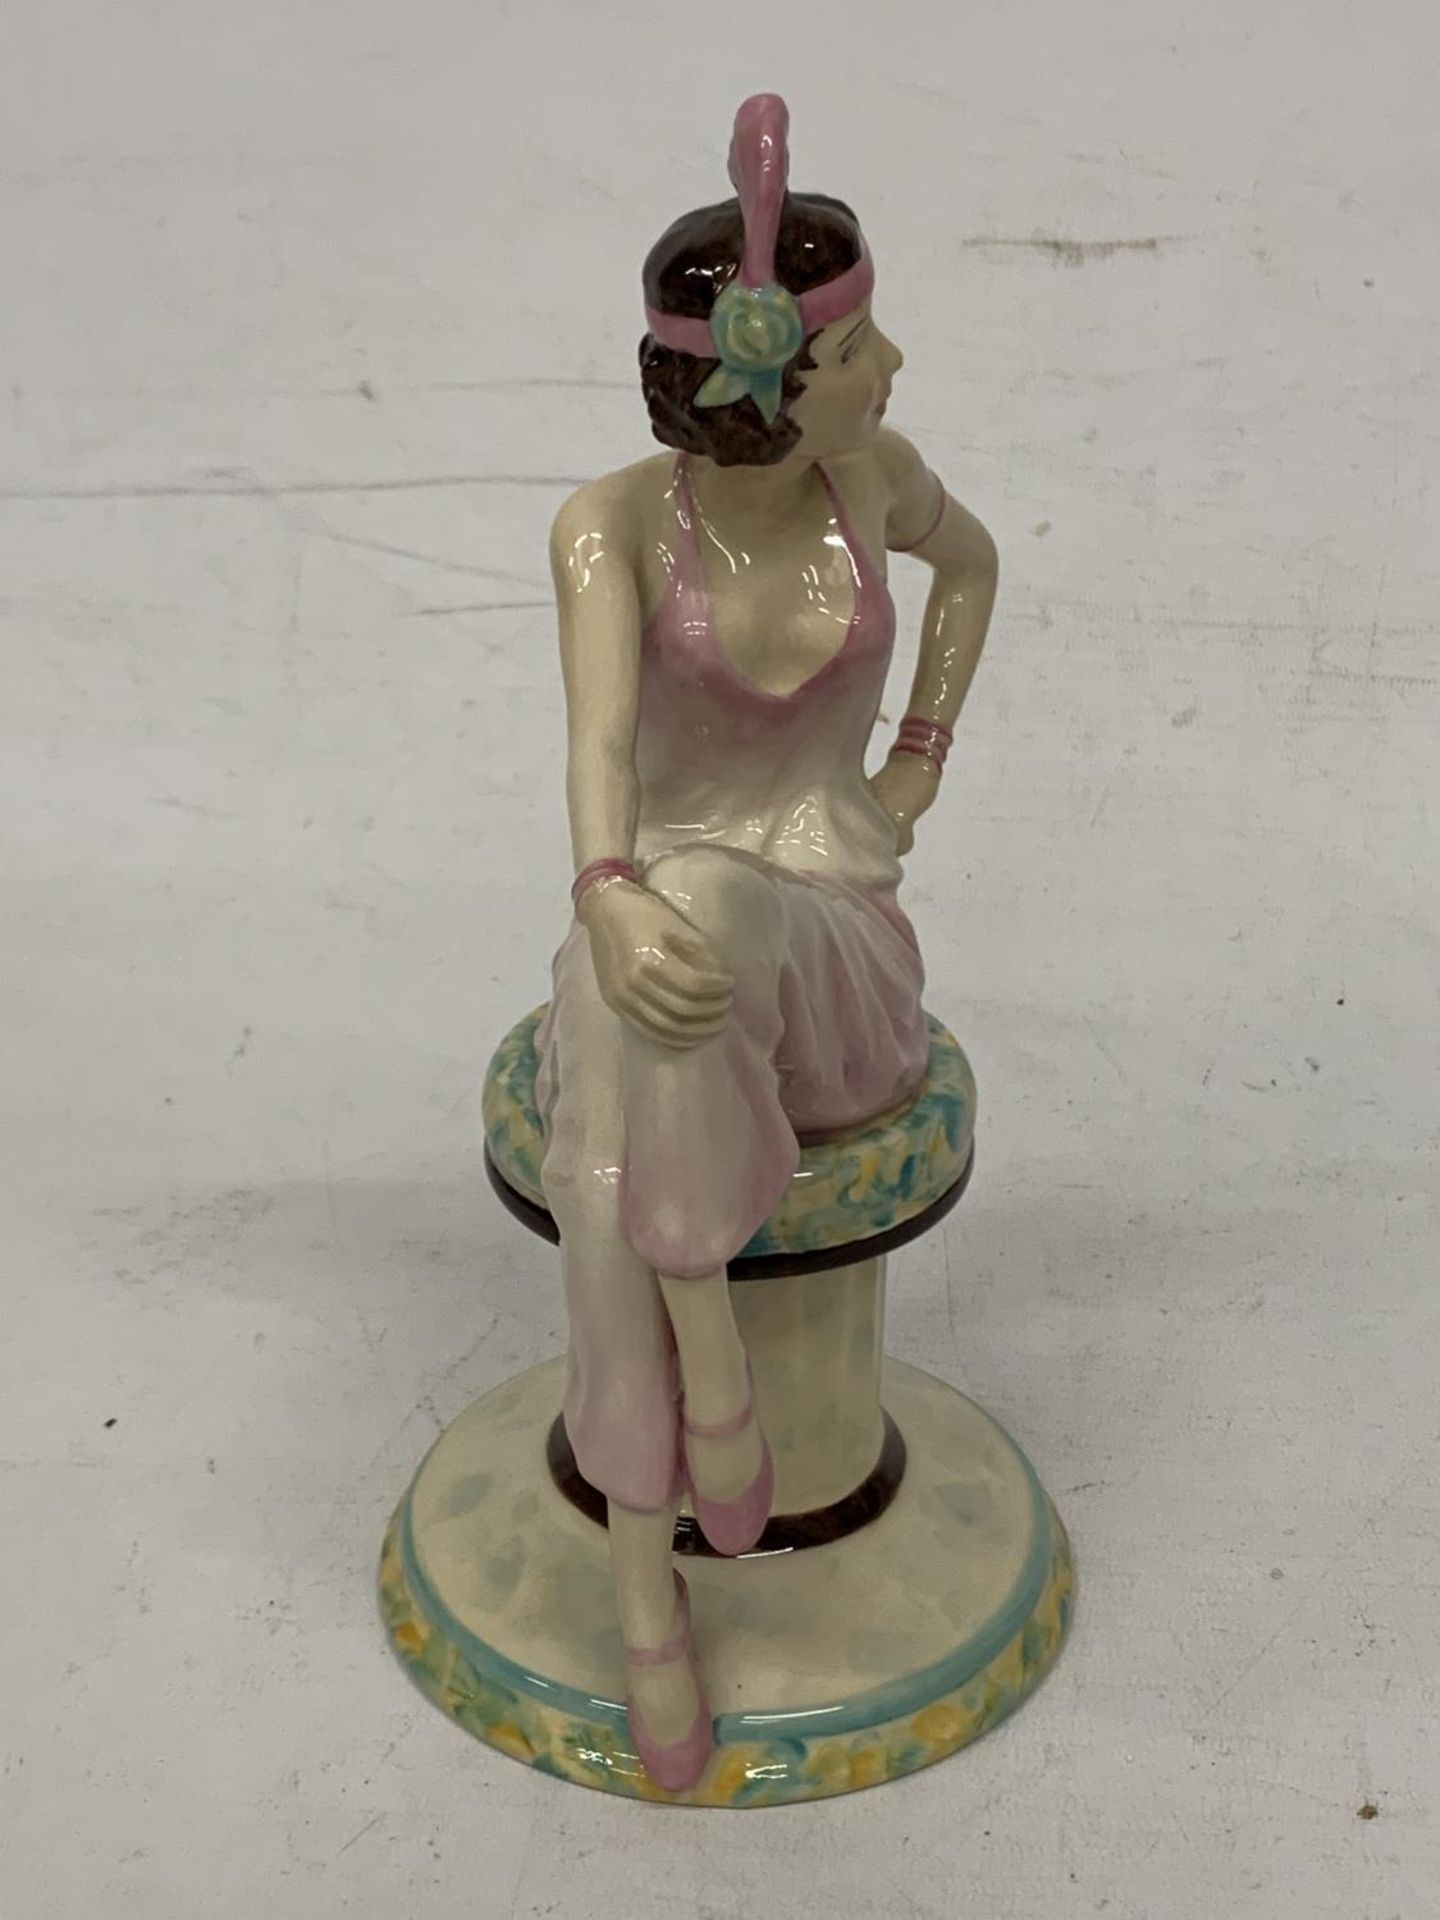 A LIMITED EDITIONM PEGGY DAVIS 'DANIELLE' FIGURINE (SIGNED IN GOLD) - Image 2 of 4